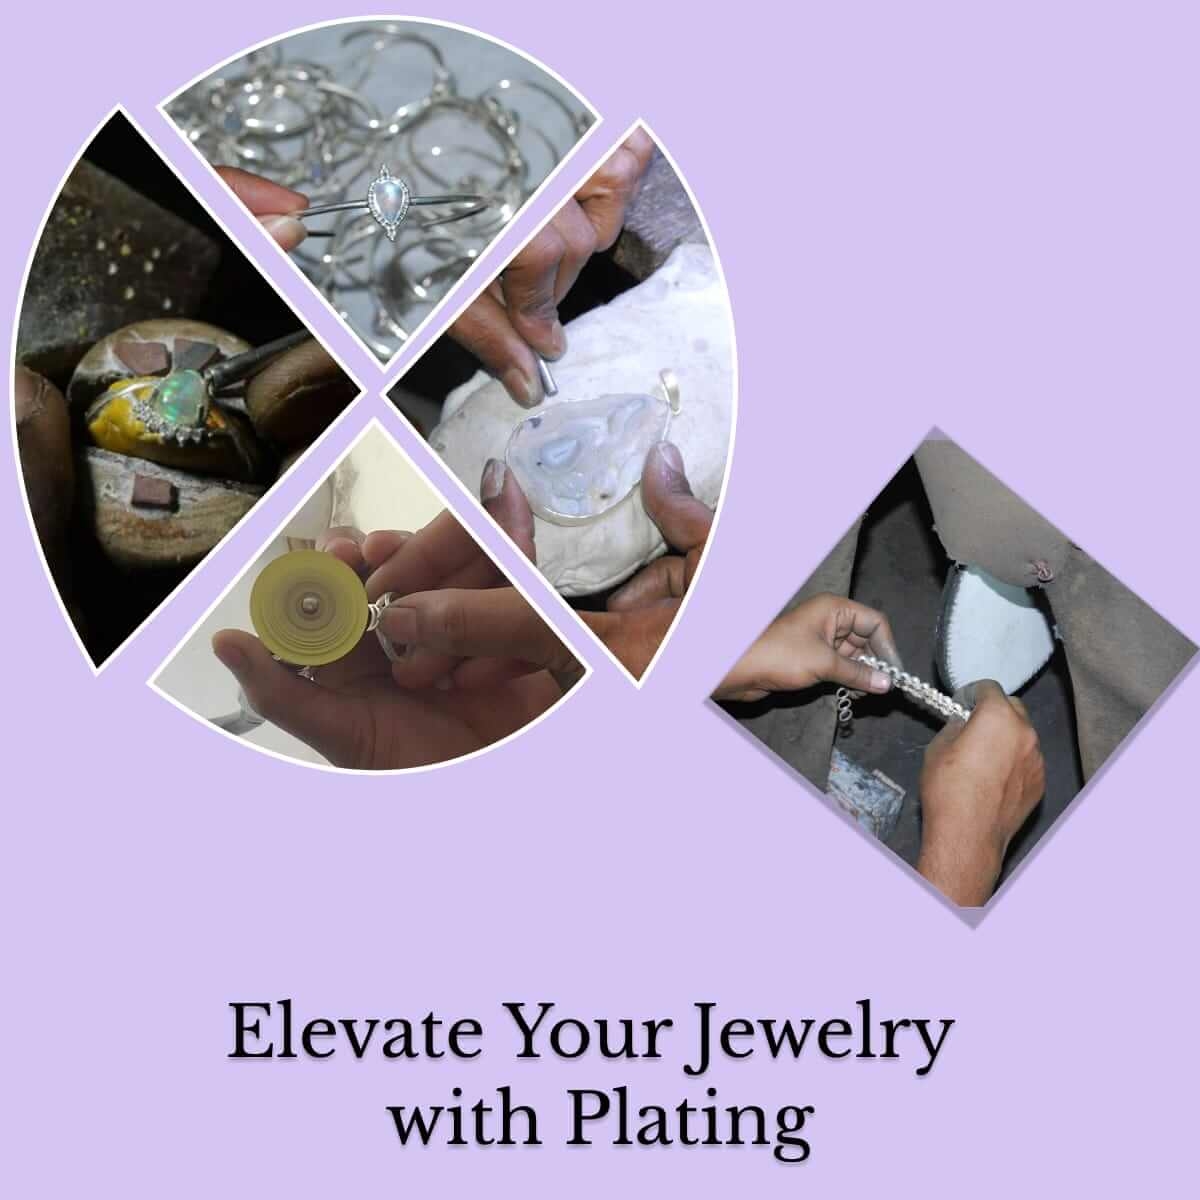 The Finishing Touch: Jewelry Plating